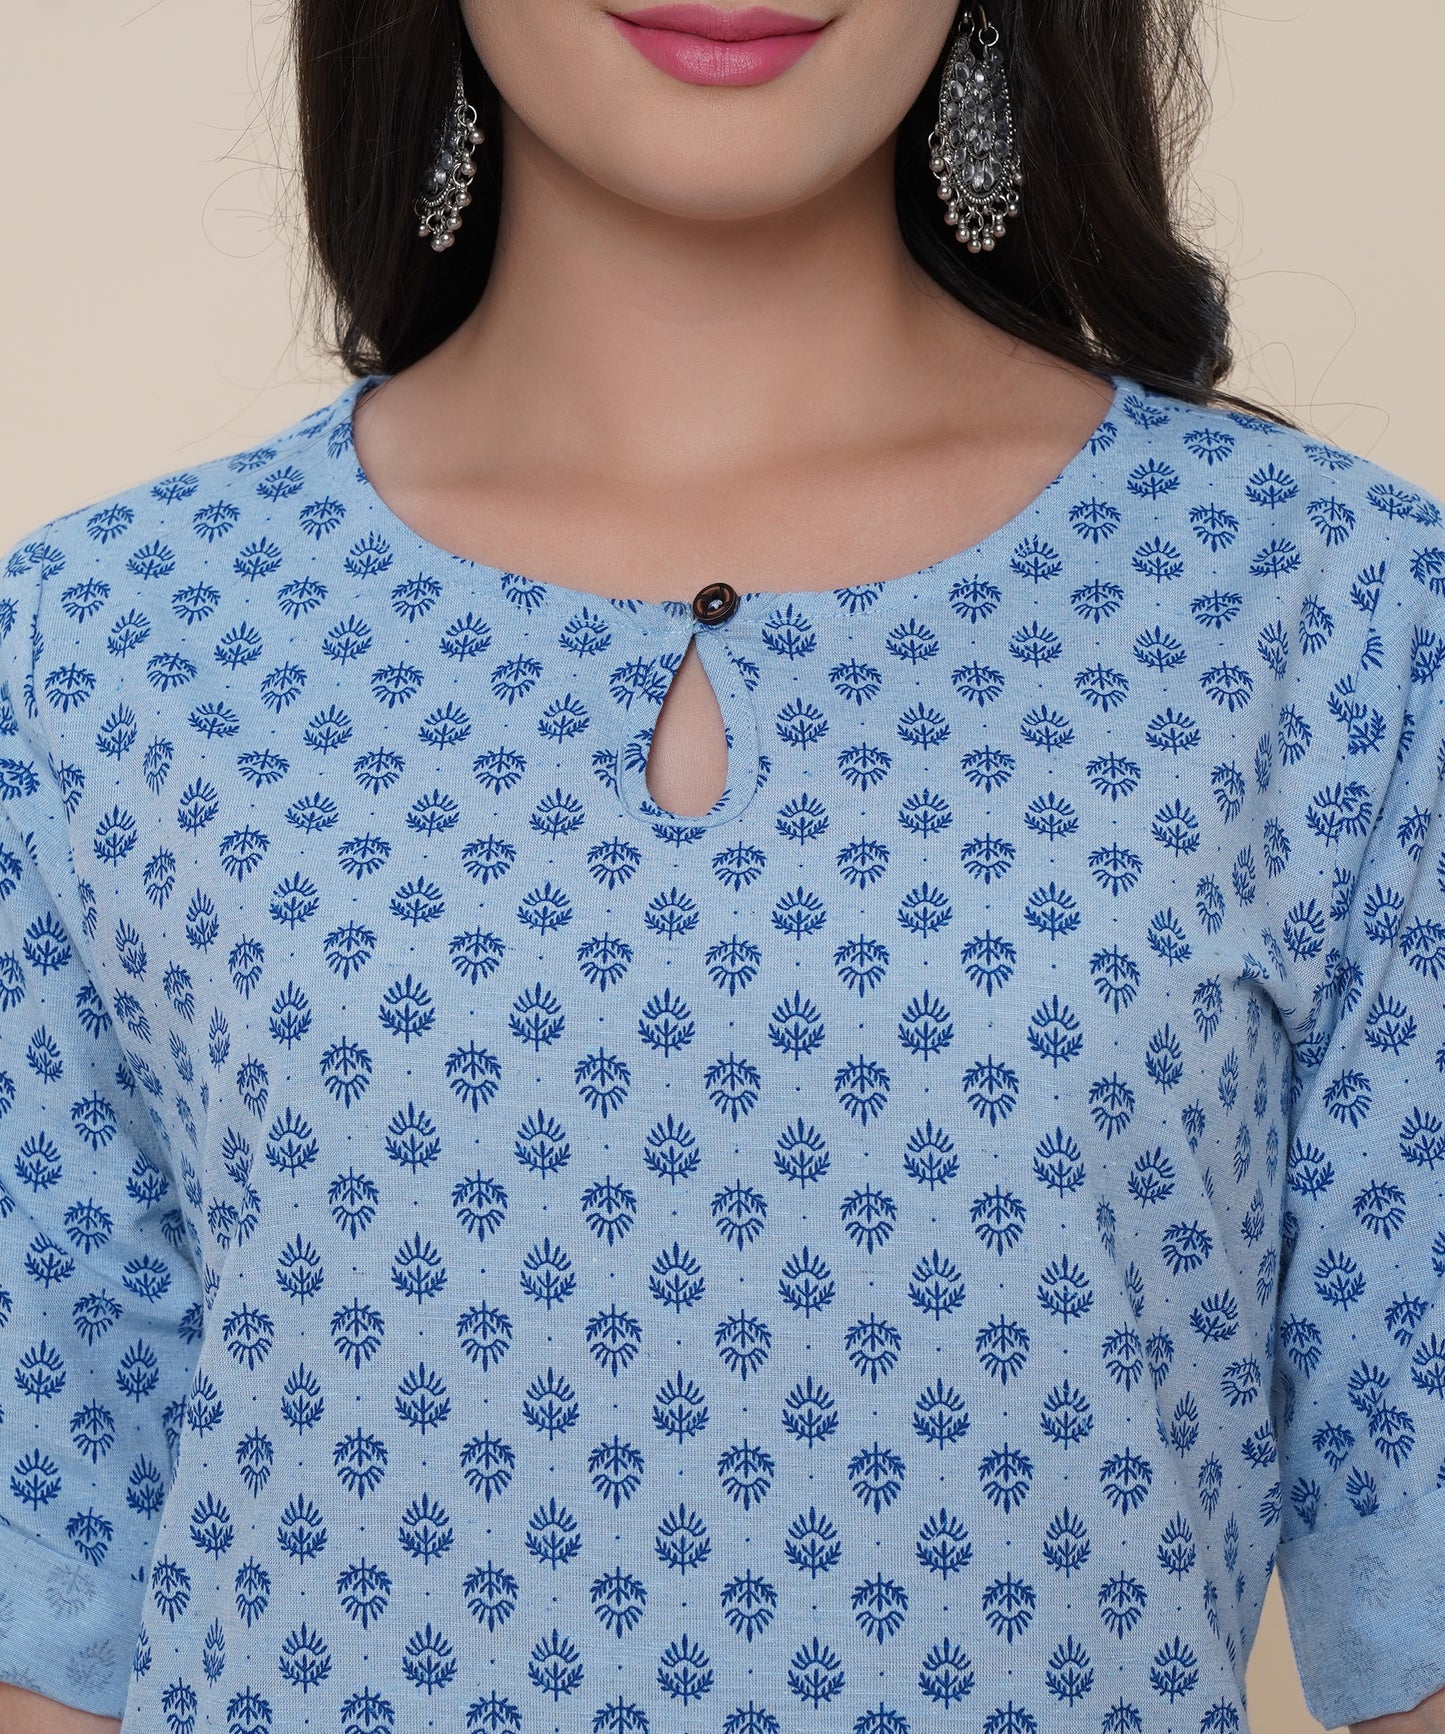 Cotton Printed Kurta Design with Tap Sleeve Button Style, Blue